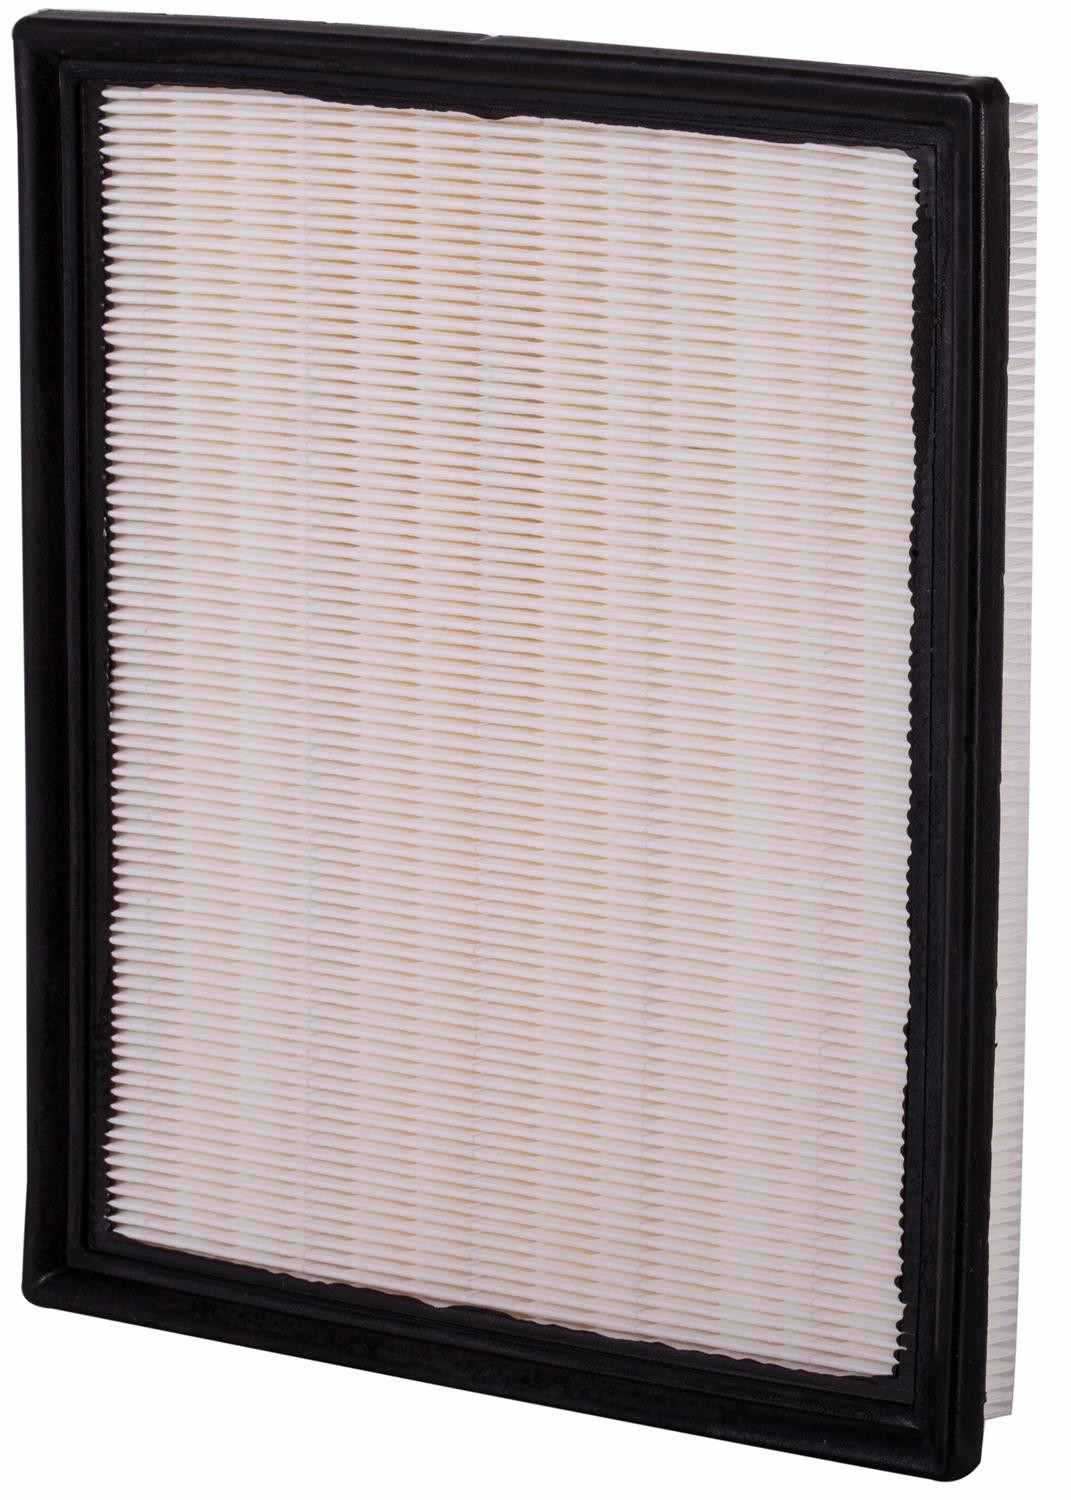 Back View of Air Filter PRONTO PA9956